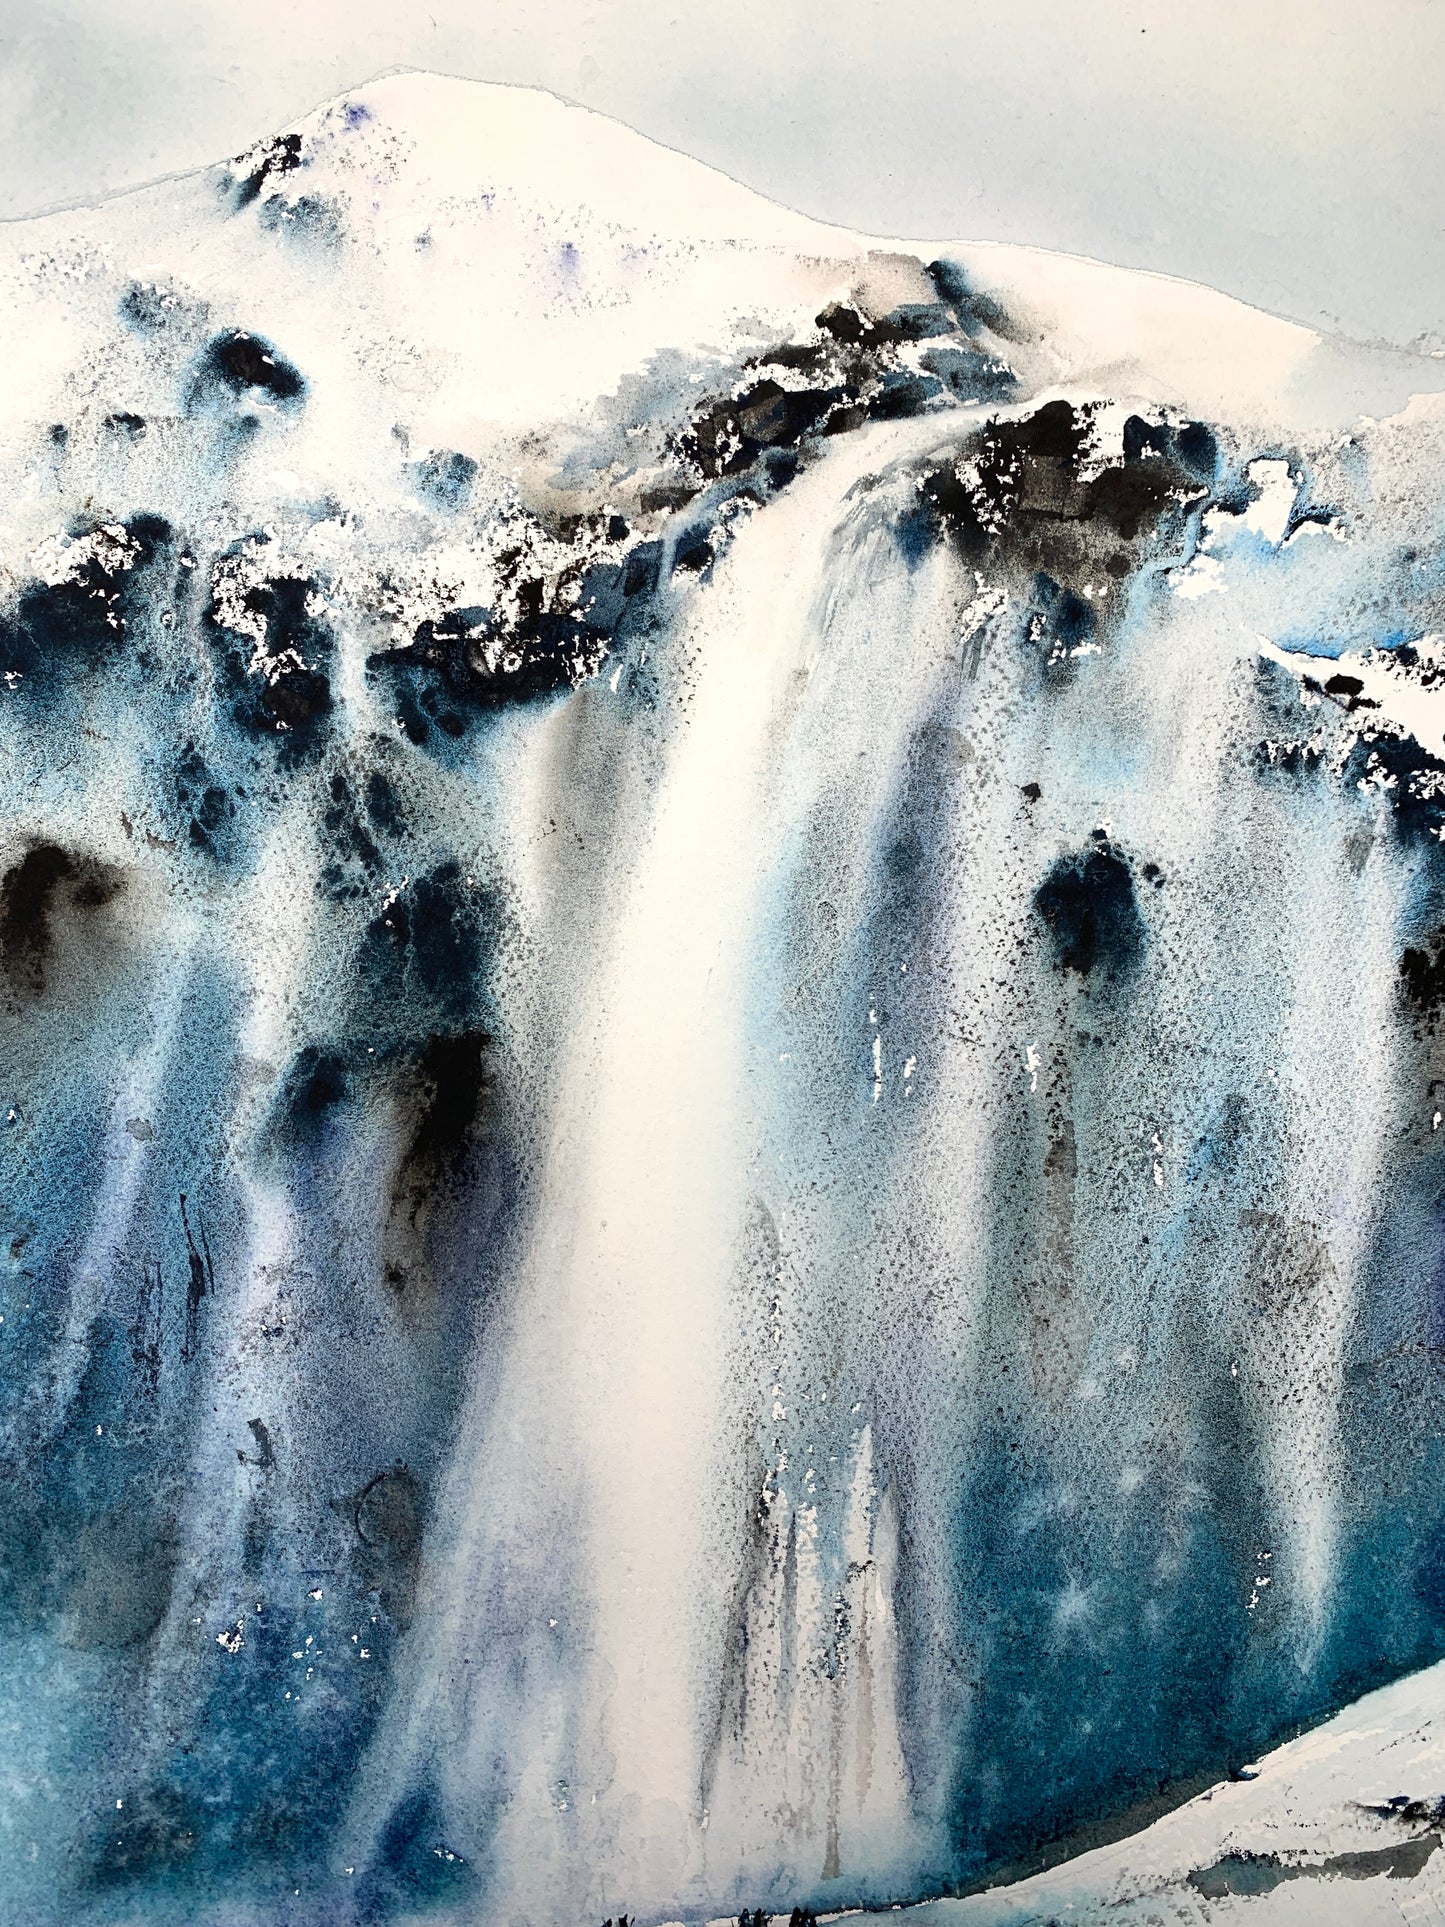 Nordic Landscape Watercolor Painting - Ice waterfall - 15 x 22 in